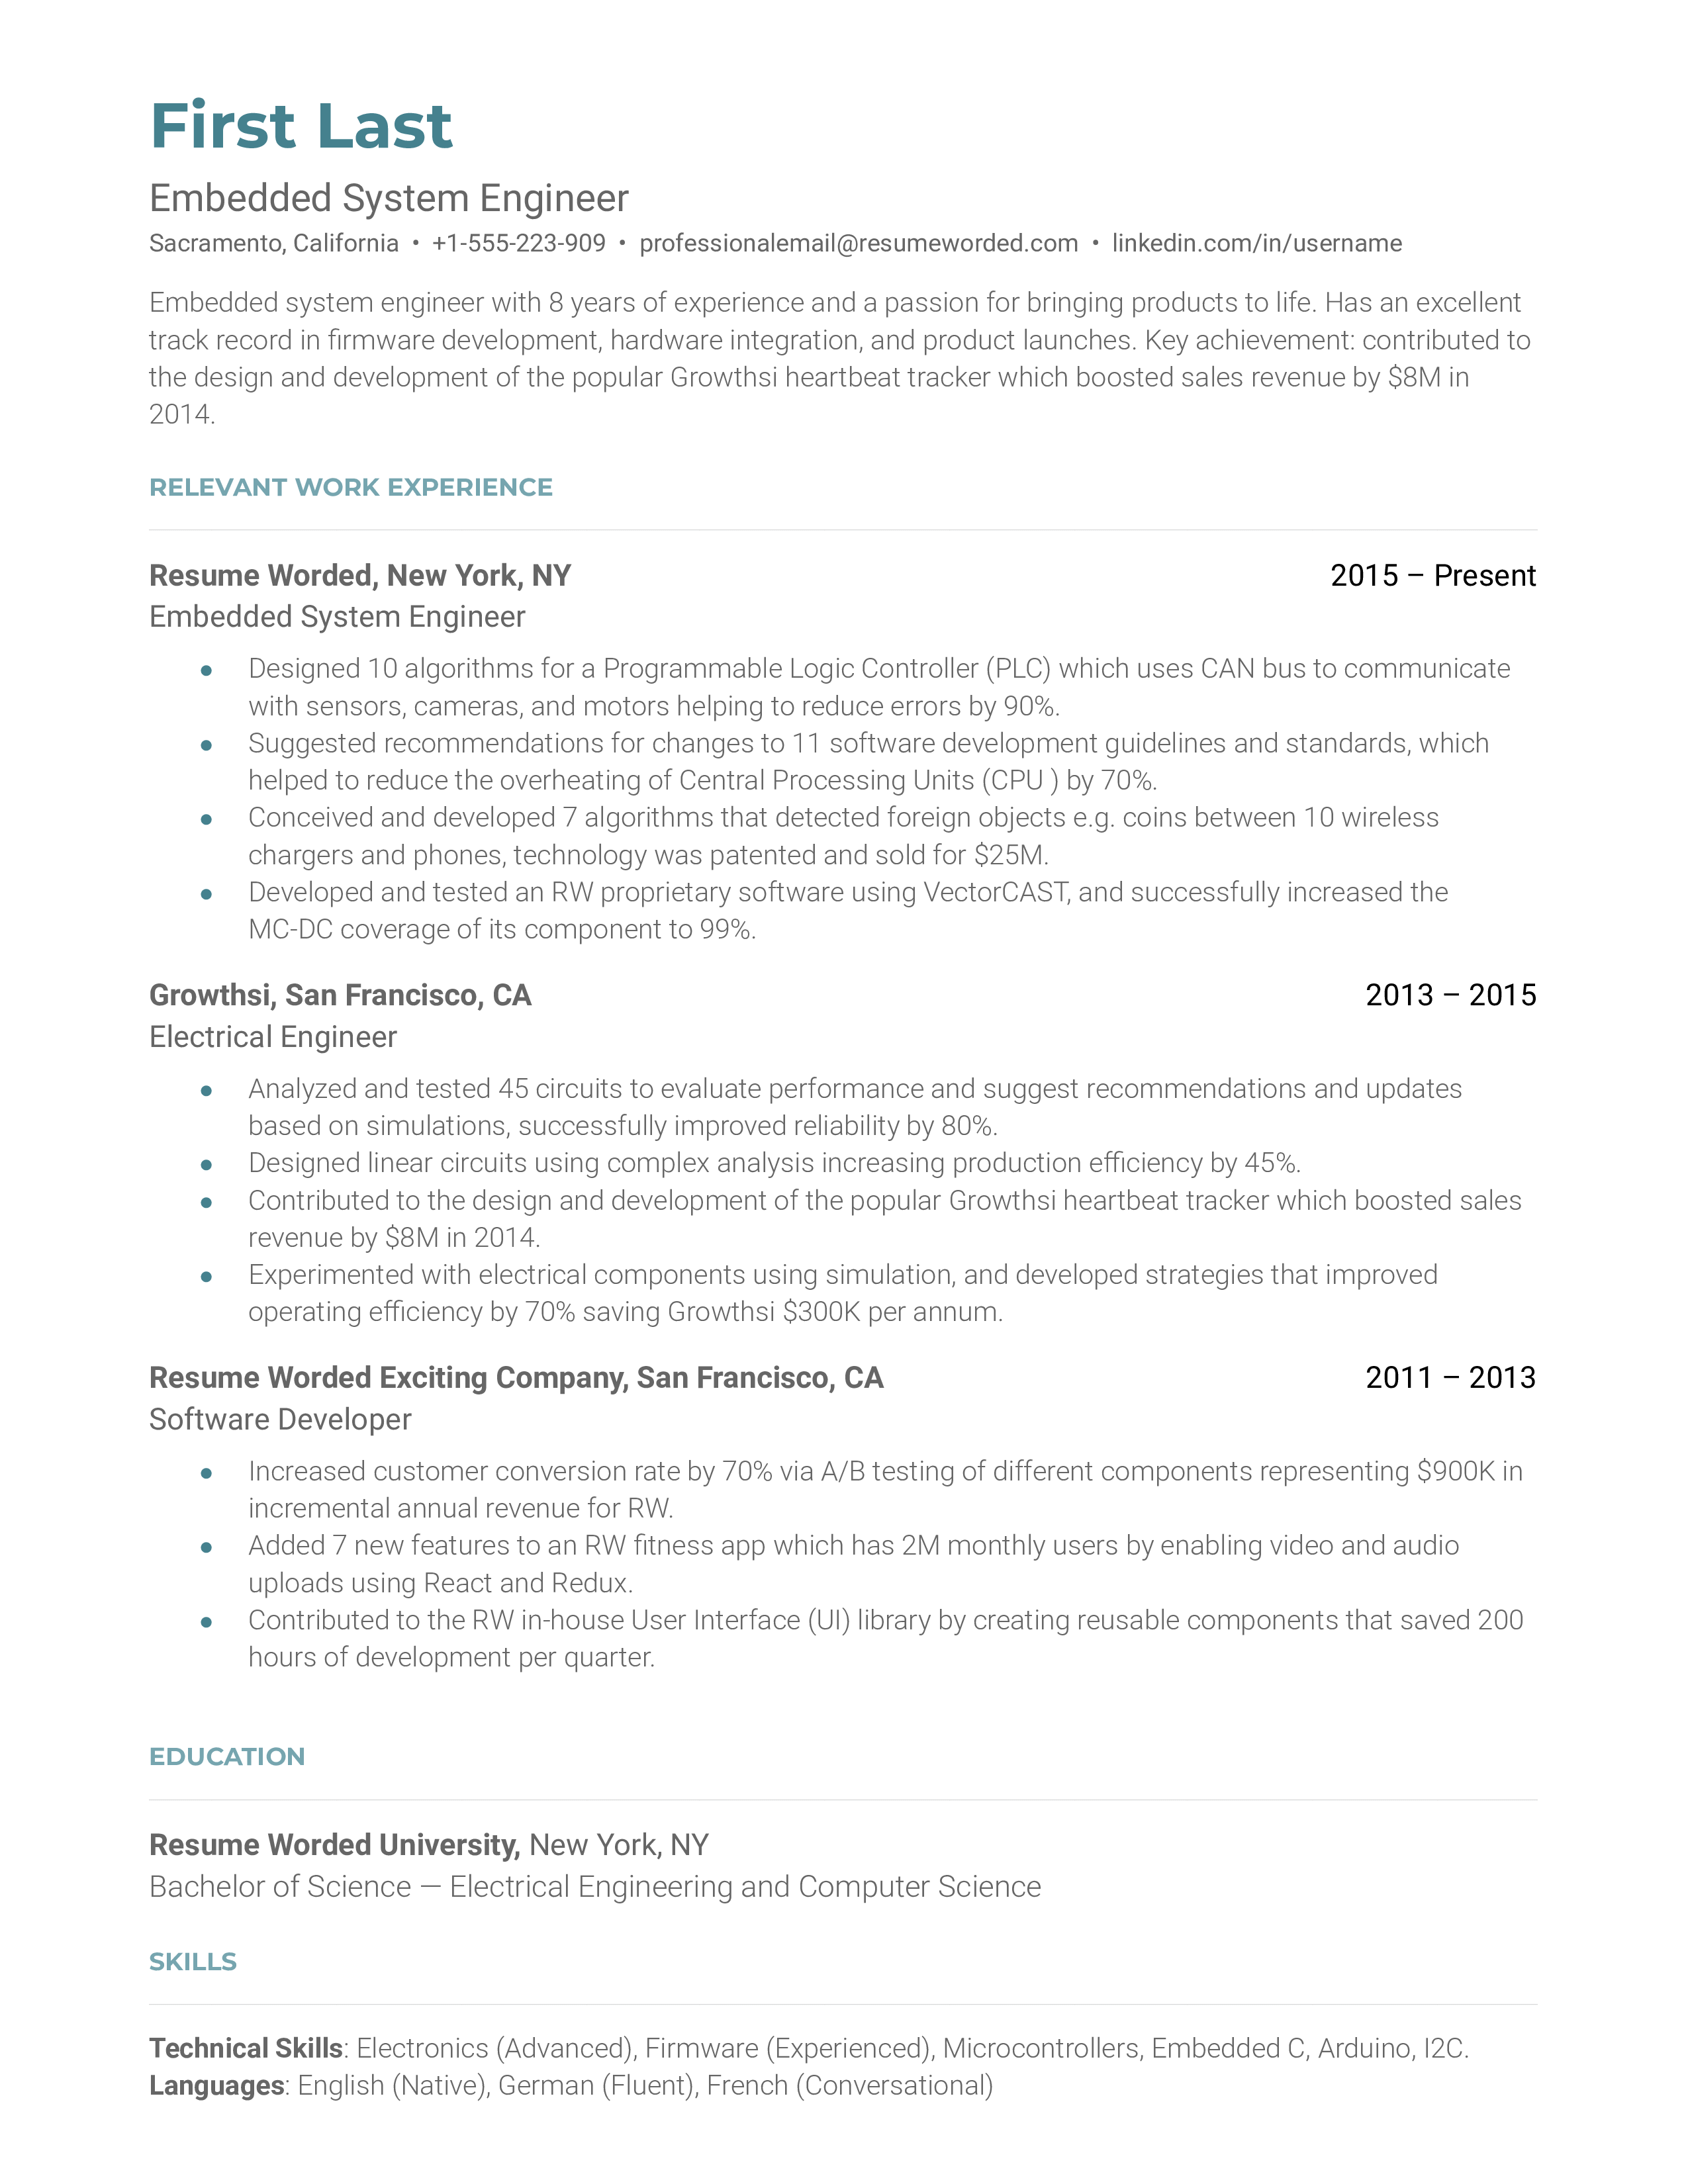 A Embedded System Engineer resume template that chronologically mentions relevant work experience